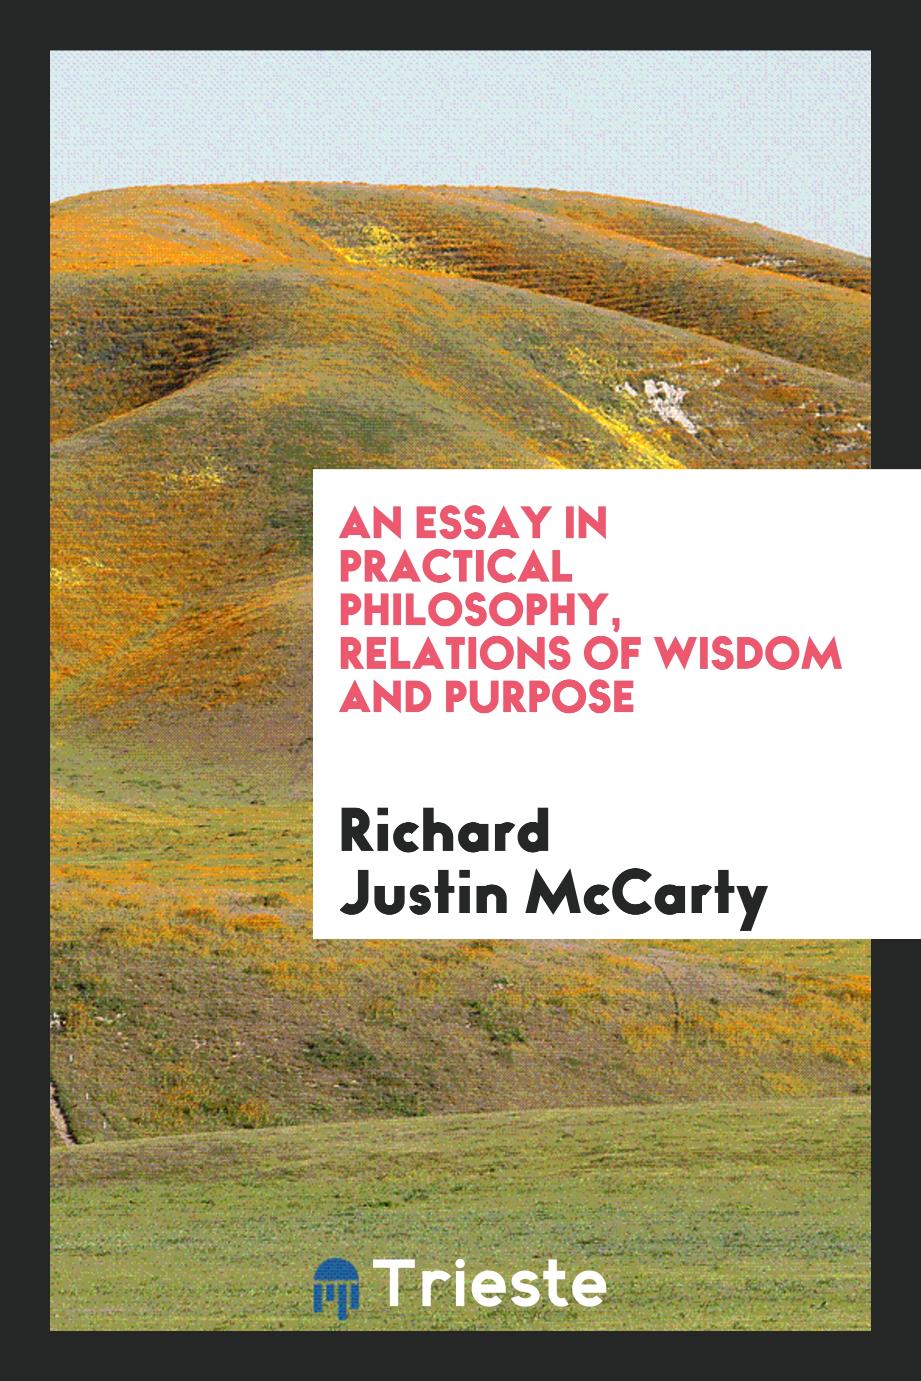 An essay in practical philosophy, relations of wisdom and purpose